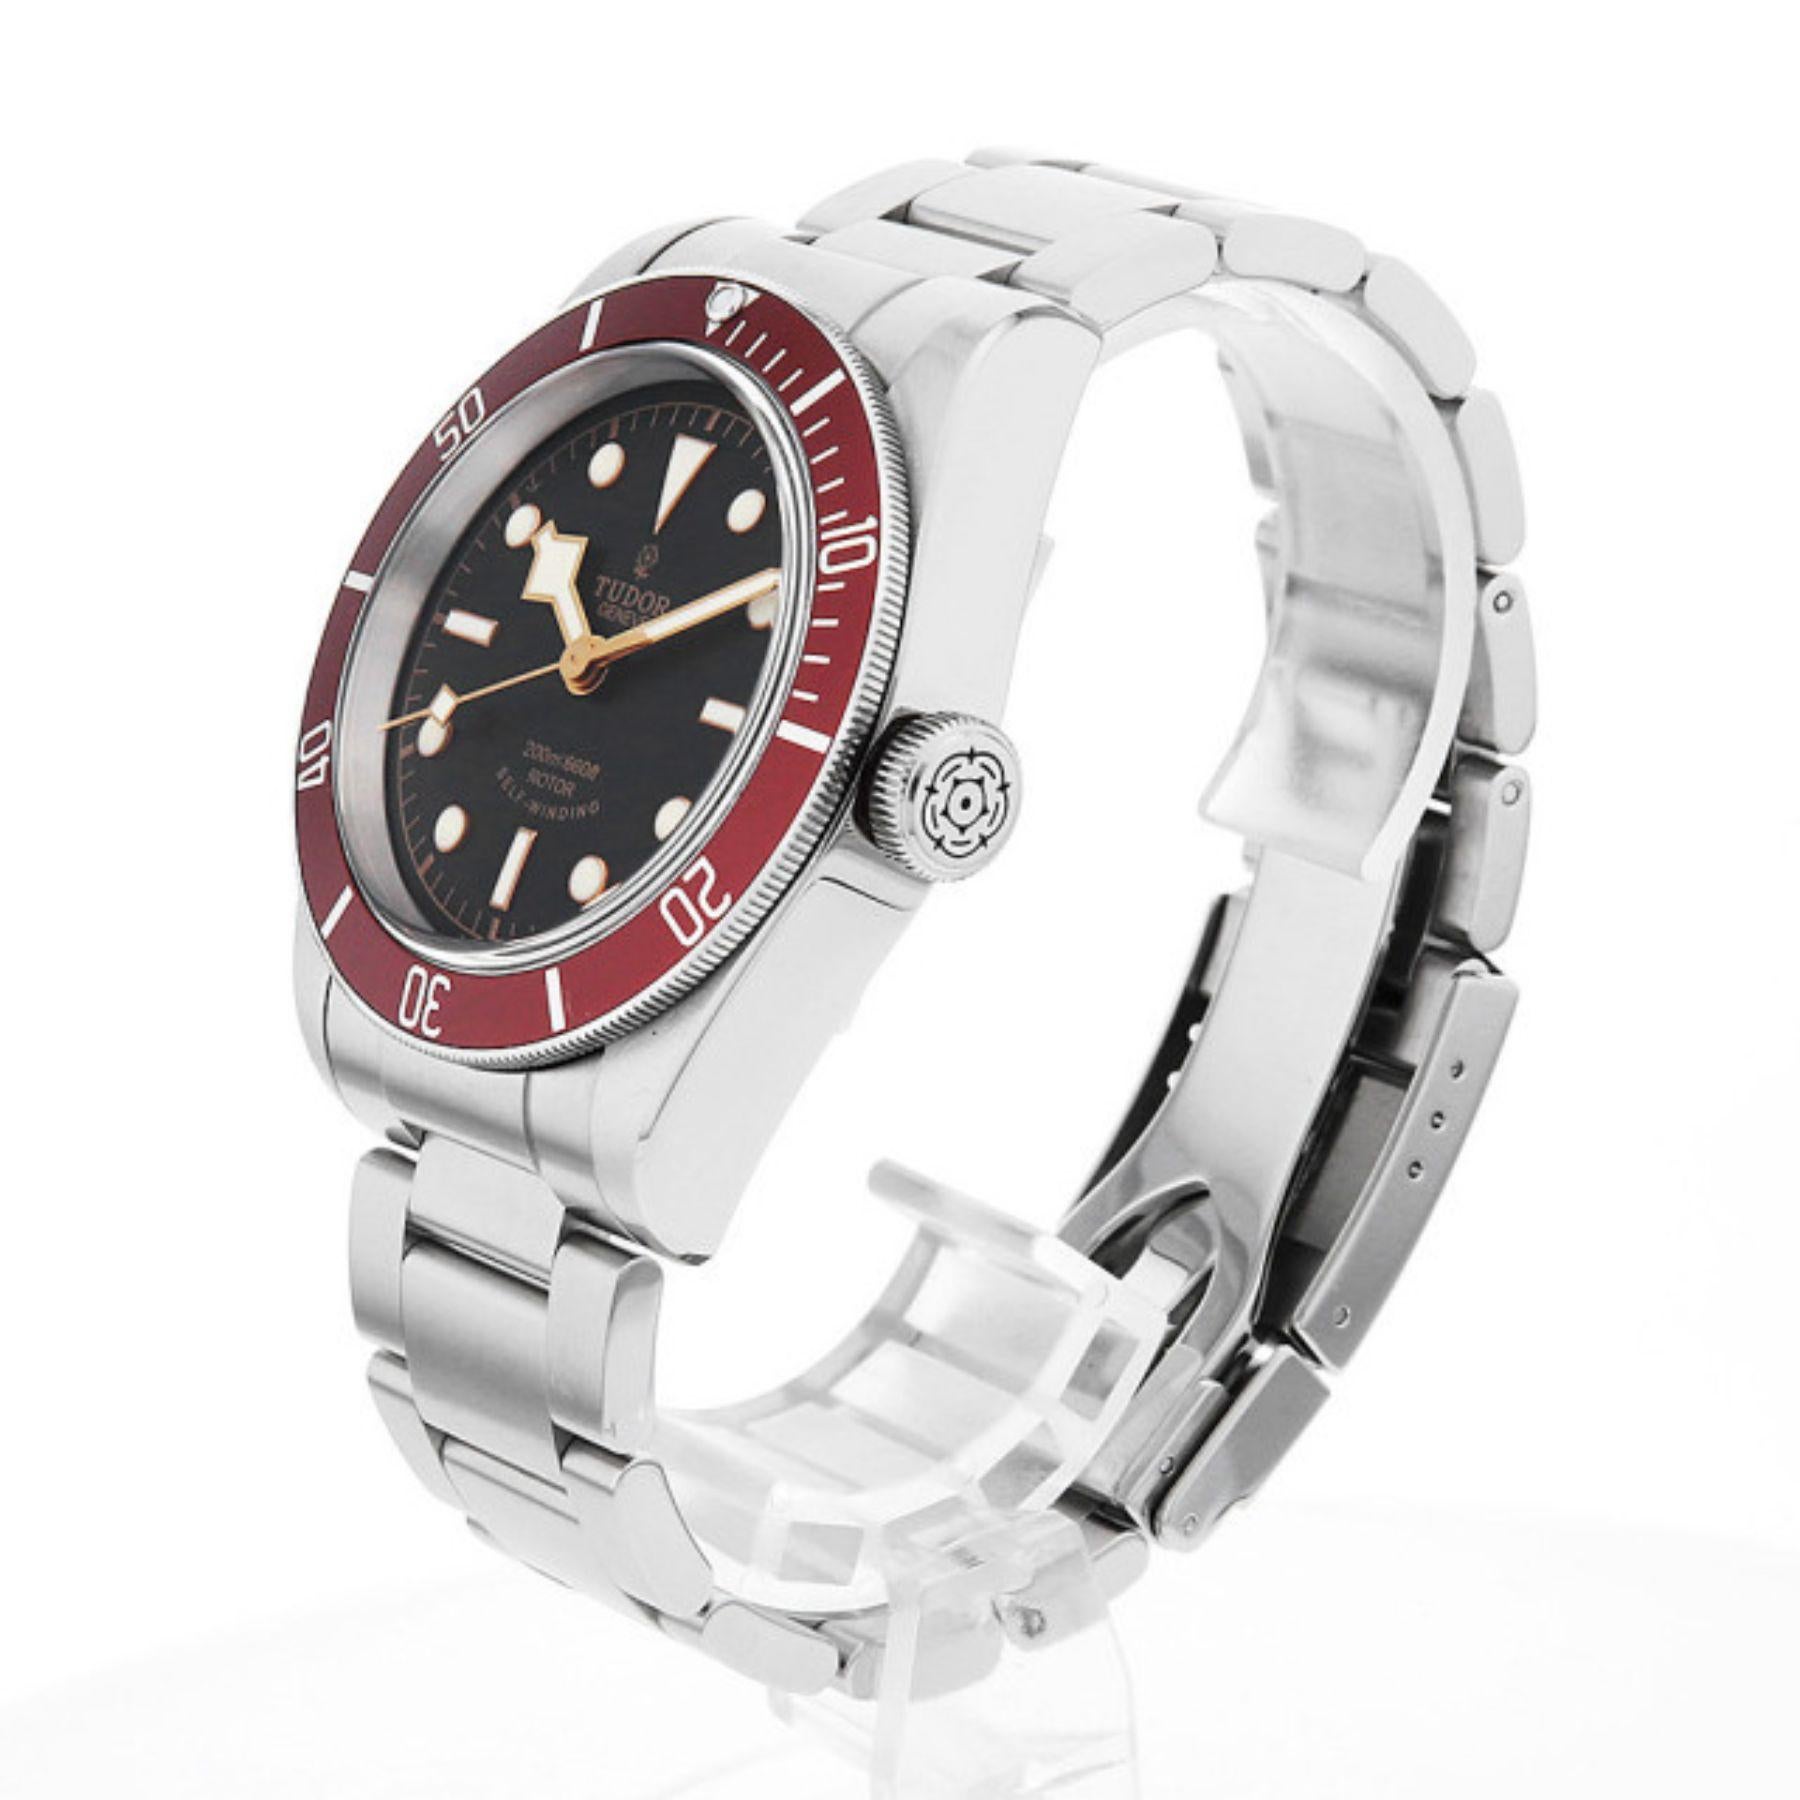 Experience the elegance and durability of the Tudor Heritage Black Bay Bracelet 79220R, a timepiece that seamlessly combines classic style with modern functionality. This pre-owned men's watch, beautifully crafted from stainless steel, features a